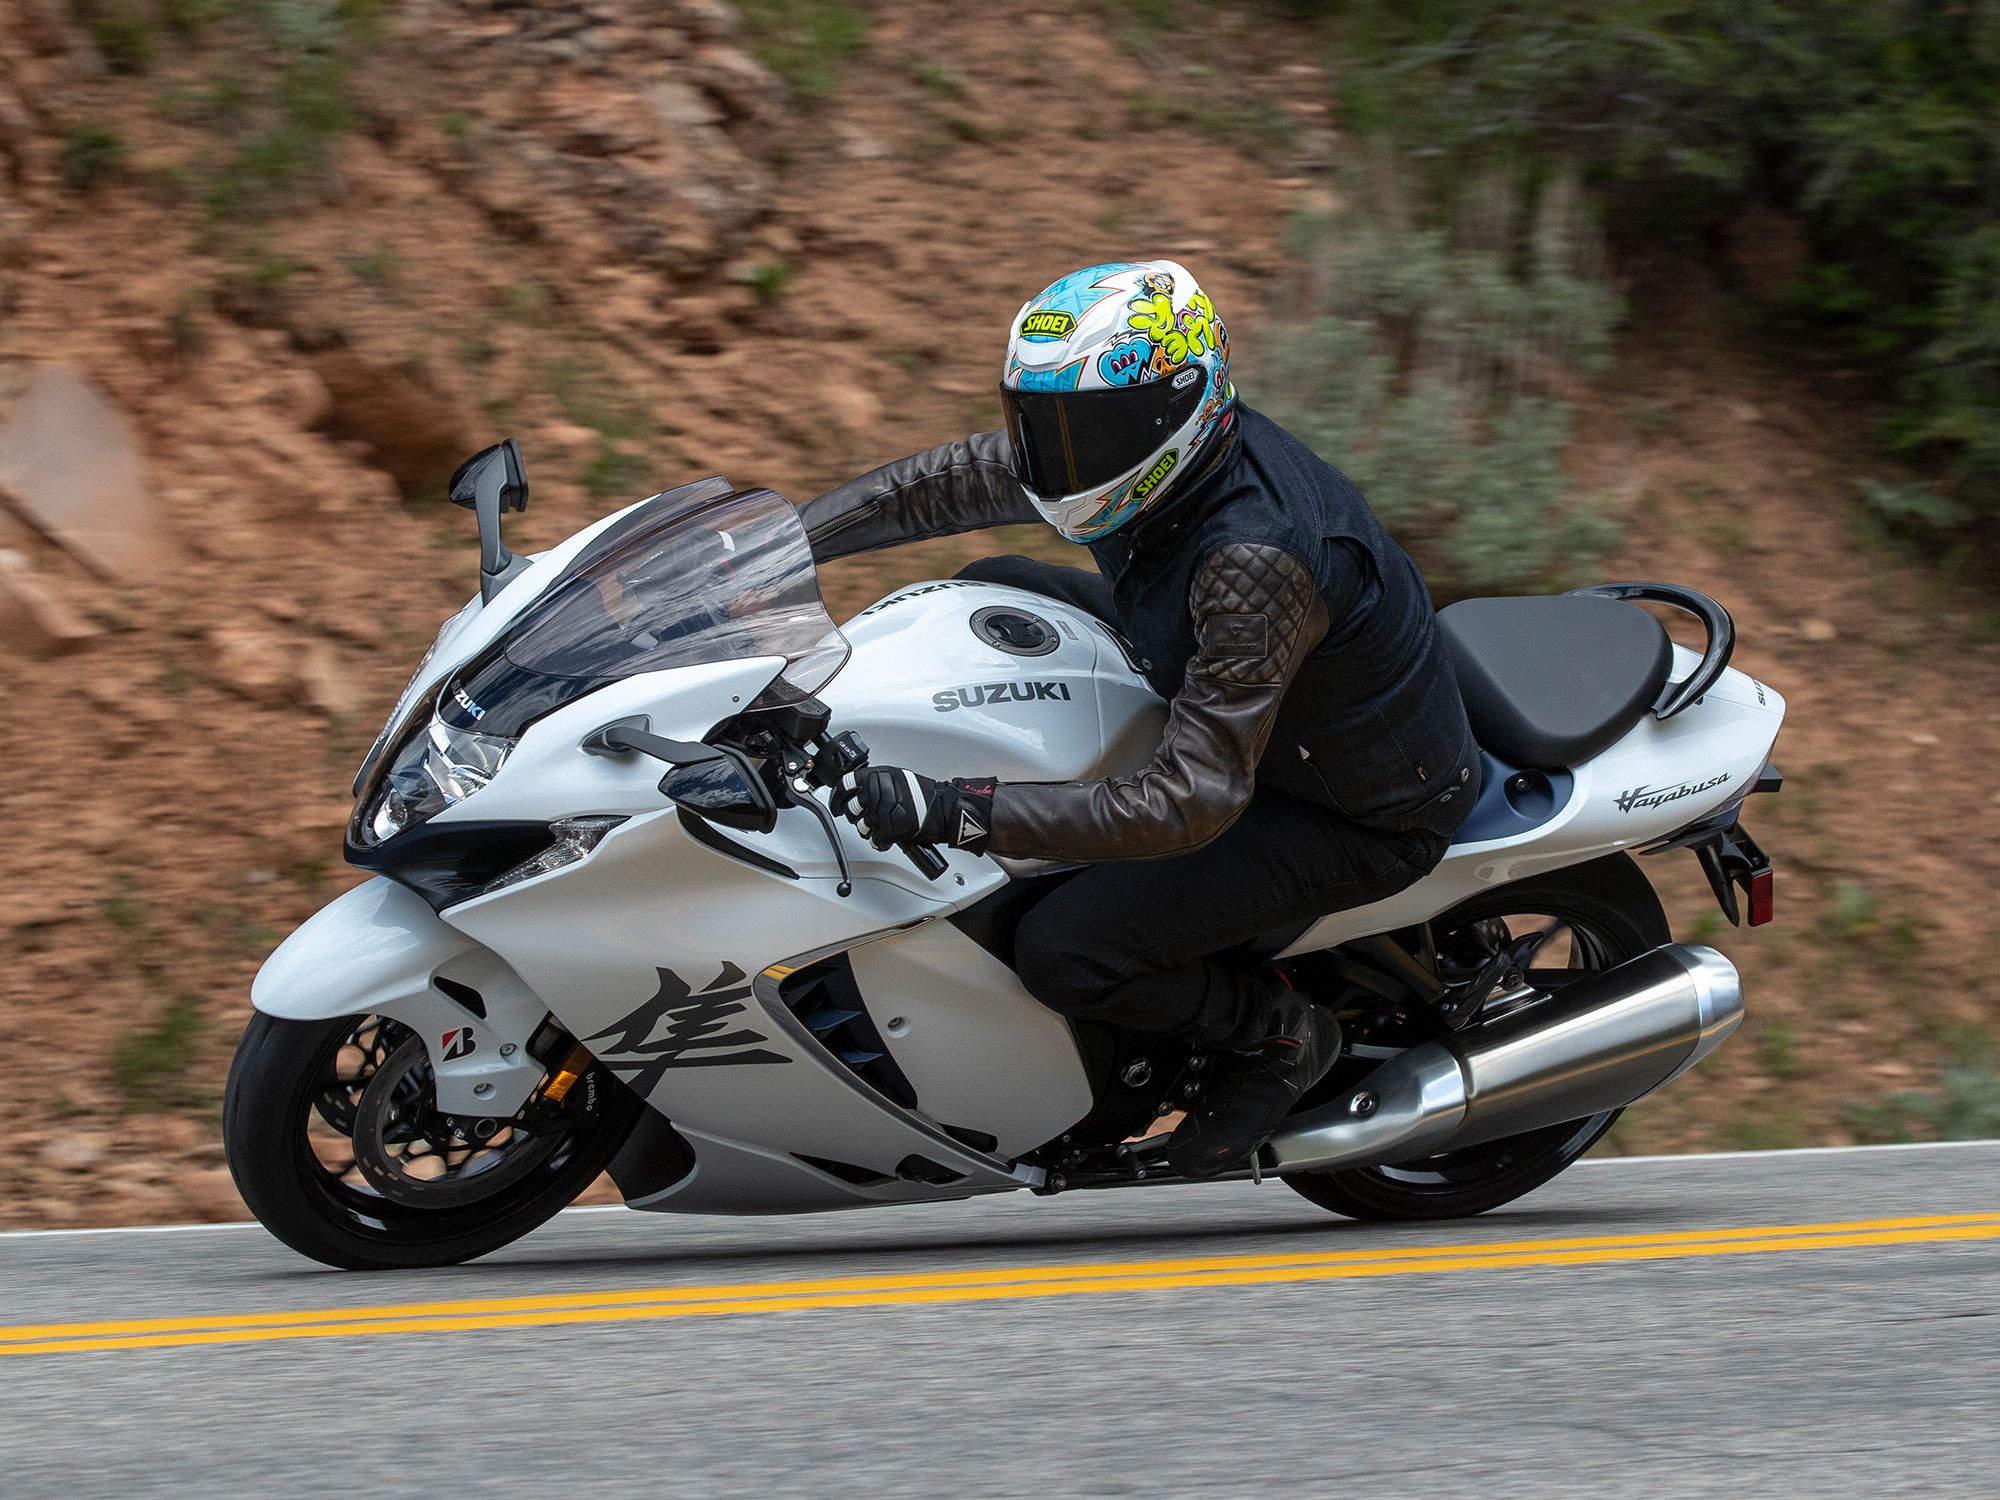 Suzuki joins the modern sportbike era with a suite of electronic rider aids. The electronics are easy to set up and allow the Hayabusa to go from mild to wild with a push of a button.